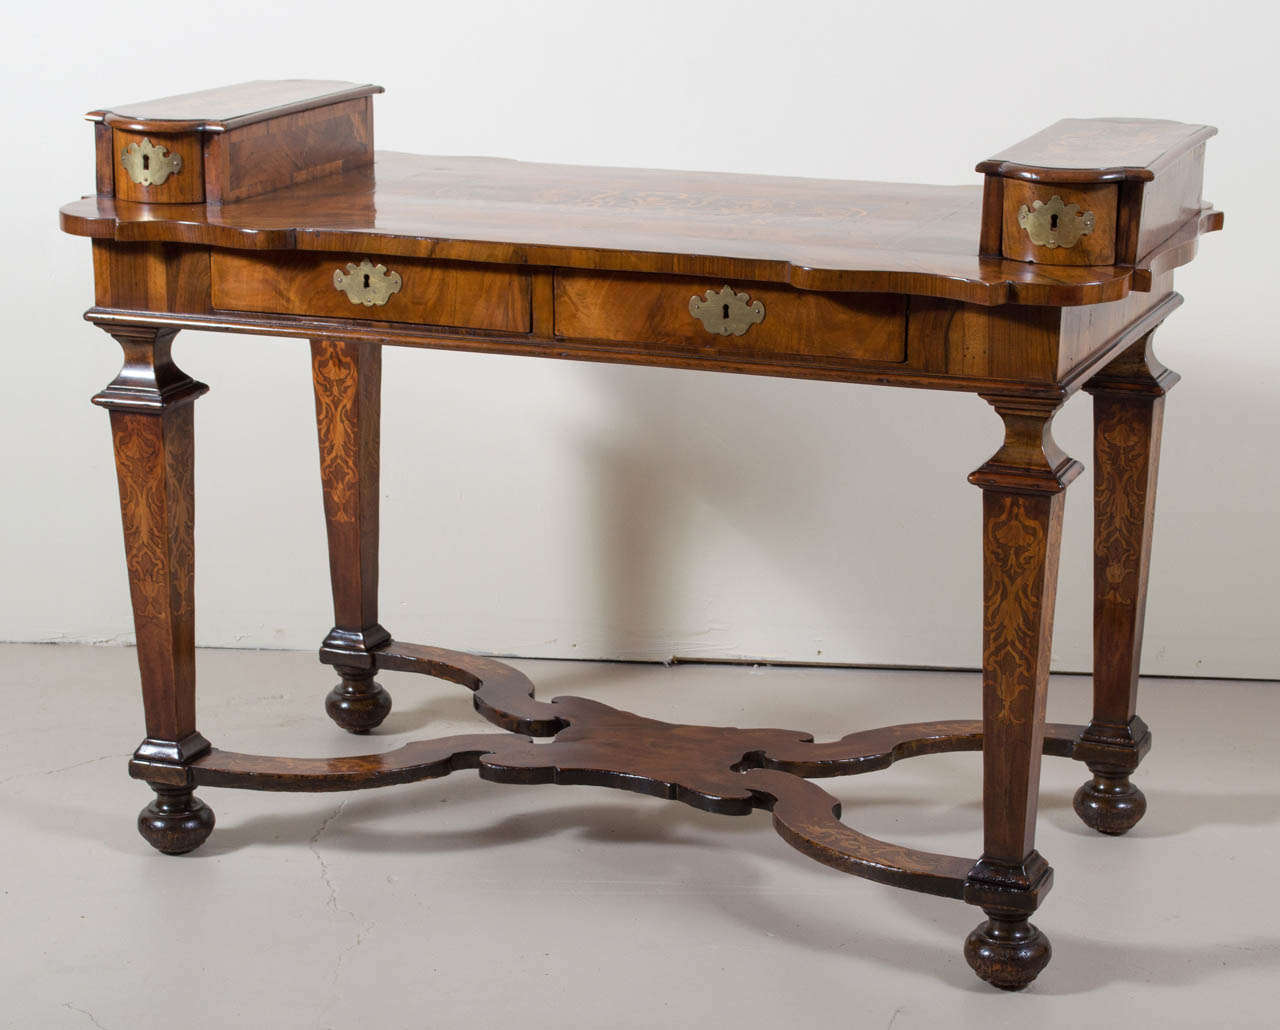 Very rare and unusual walnut and satinwood inlaid Italian desk. There are two drawers below the writing surface and two raised drawers above. The desk is supported by four inlaid and tapered legs that rest on a scroll shaped cross stretcher raised